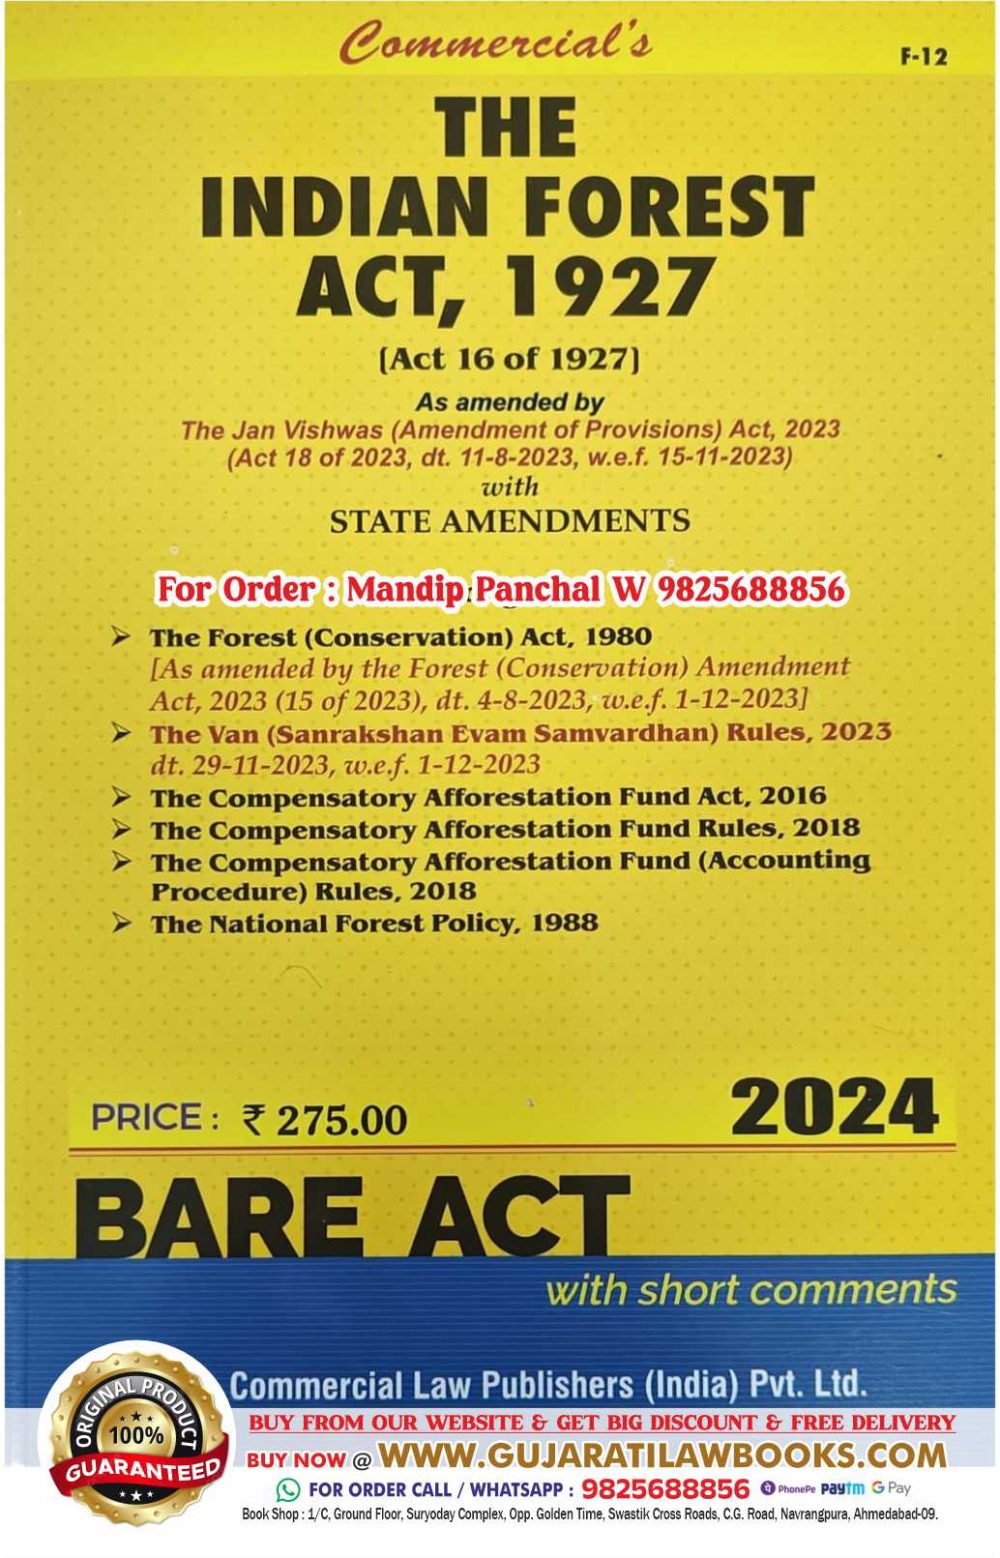 Indian Forest Act, 1927 - BARE ACT - Latest 2024 Edition Commercial's Original